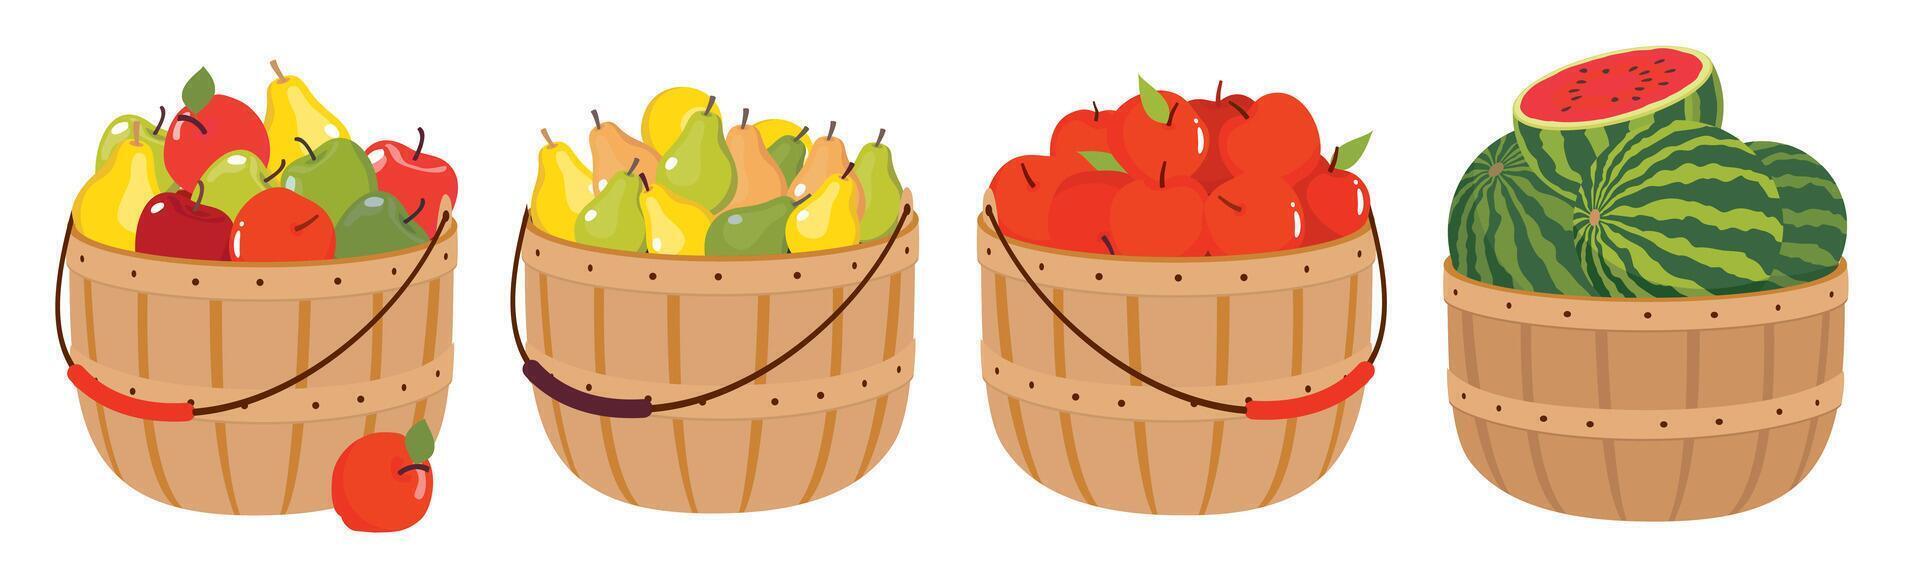 A set of fruit baskets with a harvest of apples, pears, watermelons. Pears, apples, watermelons in wicker baskets with a handle. Farmer's harvest of fruits in a container. Vector illustrated clipart.